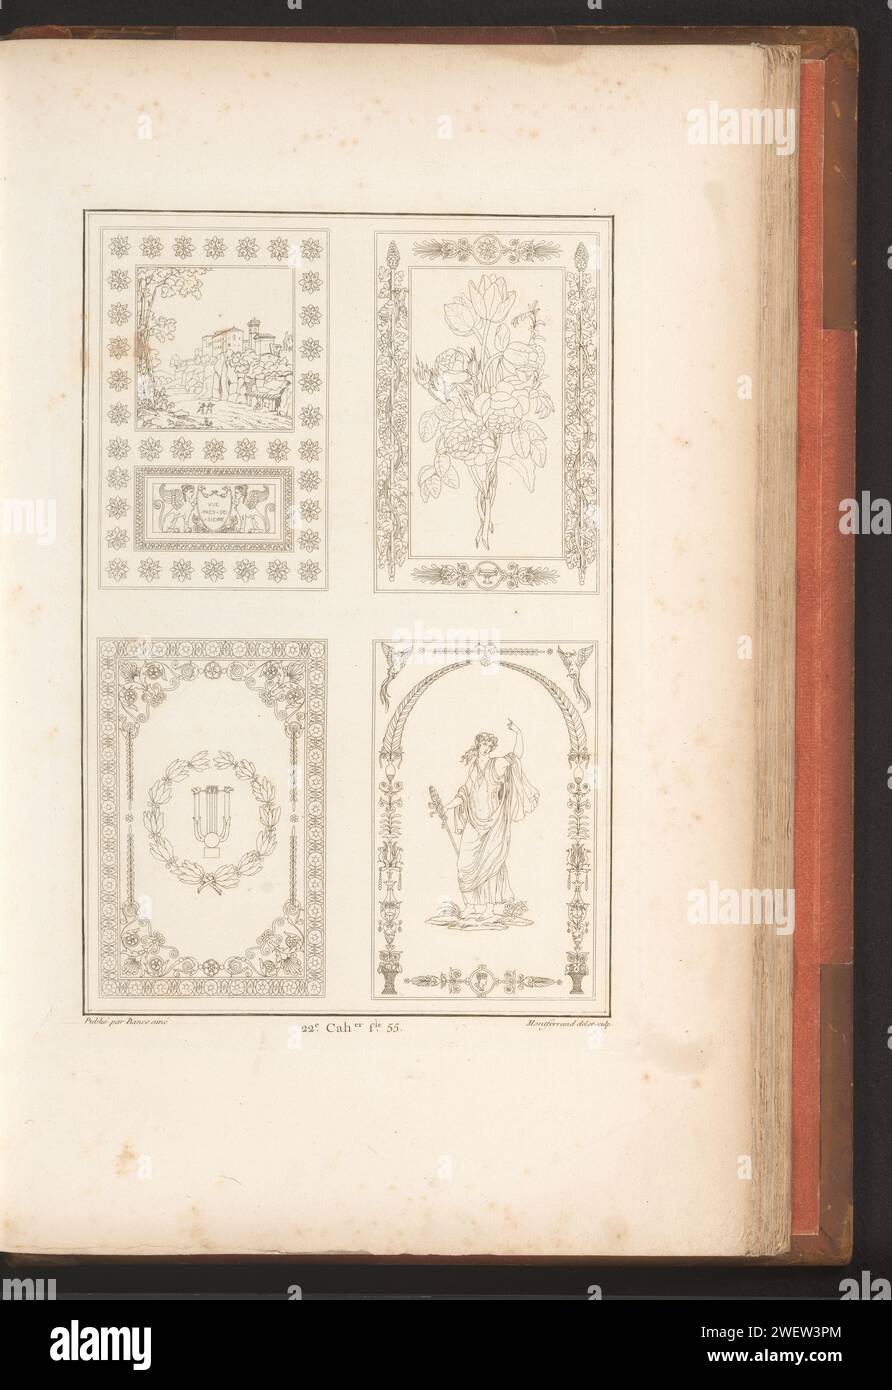 Ceiling decorations or wall rugs, August Ricard de Montferrand, 1820  Four figurative ceiling or wall decorations or wall rugs. Part (22nd. Cah.er F.LE 55) of the Prentalbum with two series of a total of 138 ornament prints by Beauvallet and Normand, 'Fragmens d'Ortuens dance le style antique'.  paper etching ornaments ~ art. (decorated) ceiling. carpet, rug Stock Photo